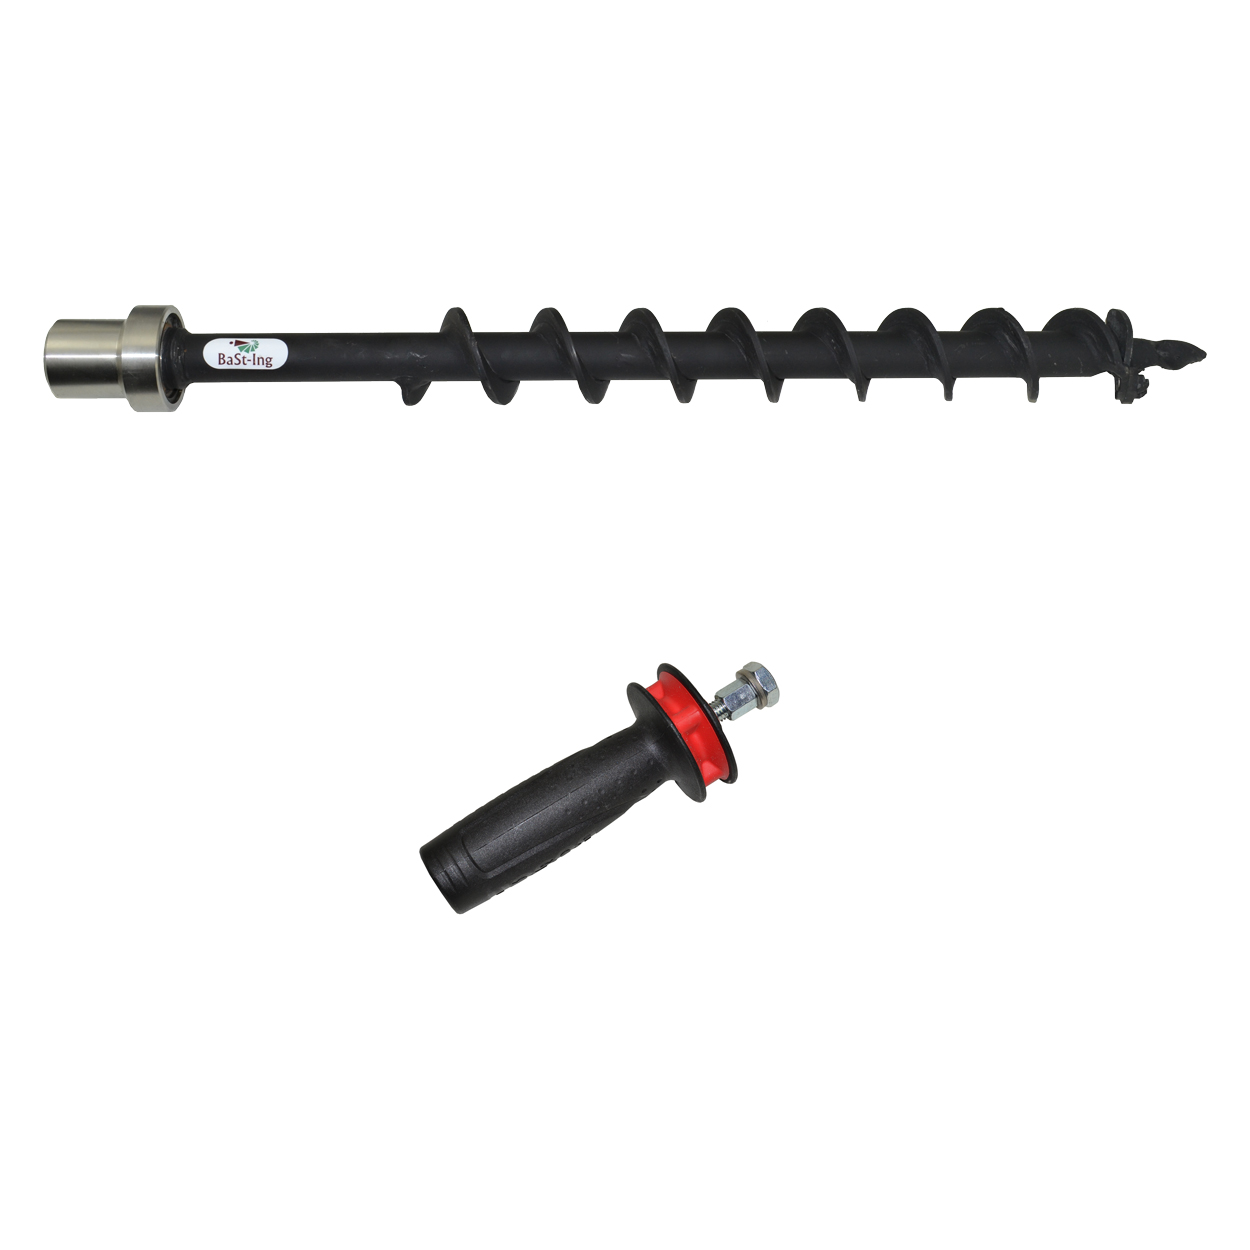 DrillFast - Earth drilling tool (Auger)